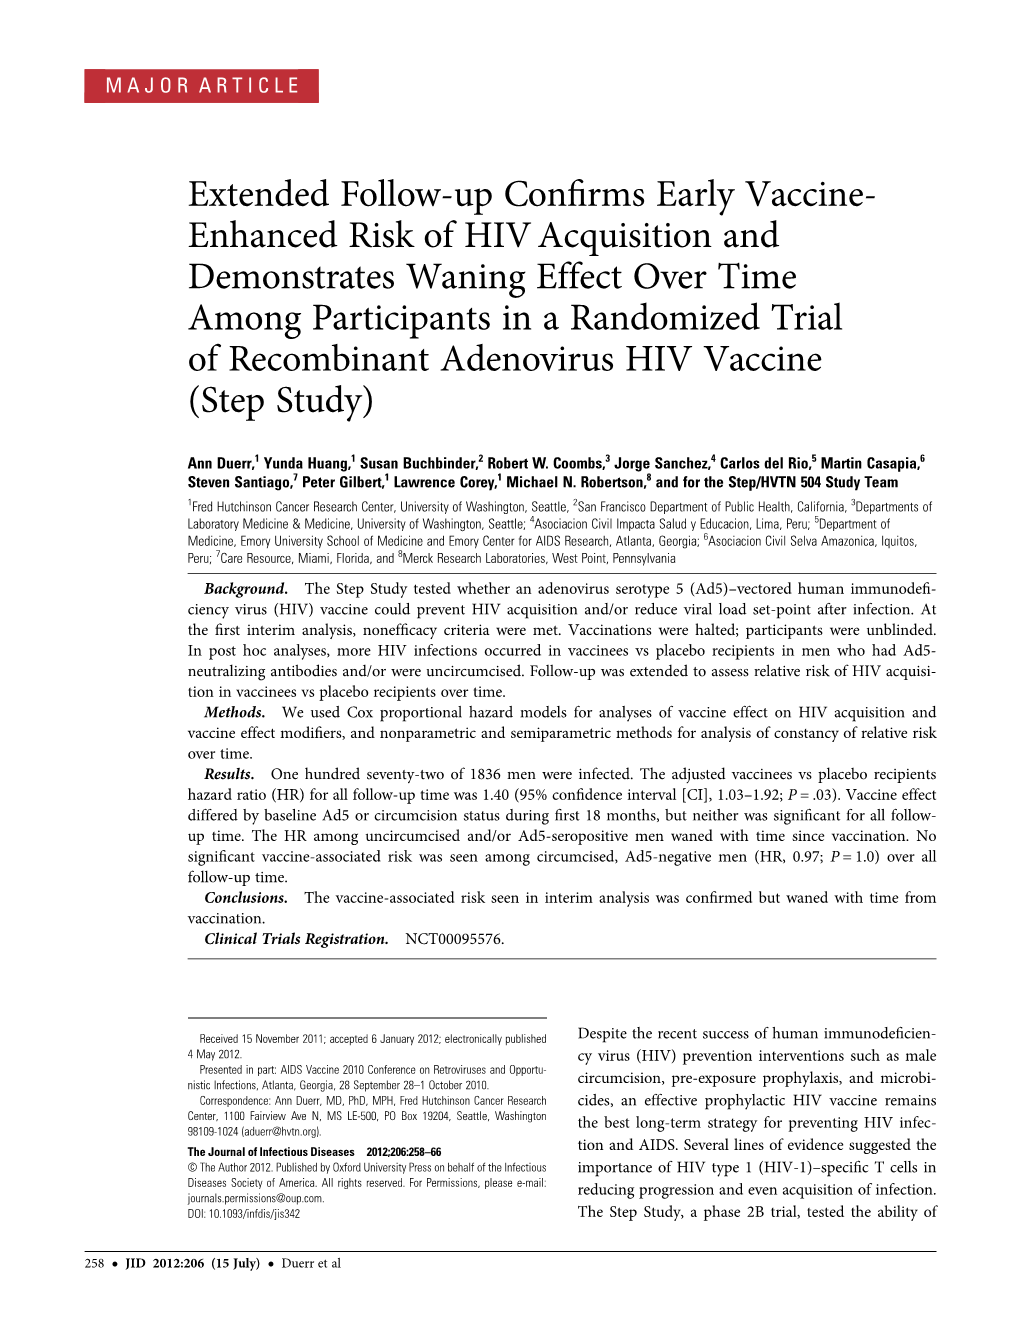 Extended Follow-Up Confirms Early Vaccine- Enhanced Risk of HIV